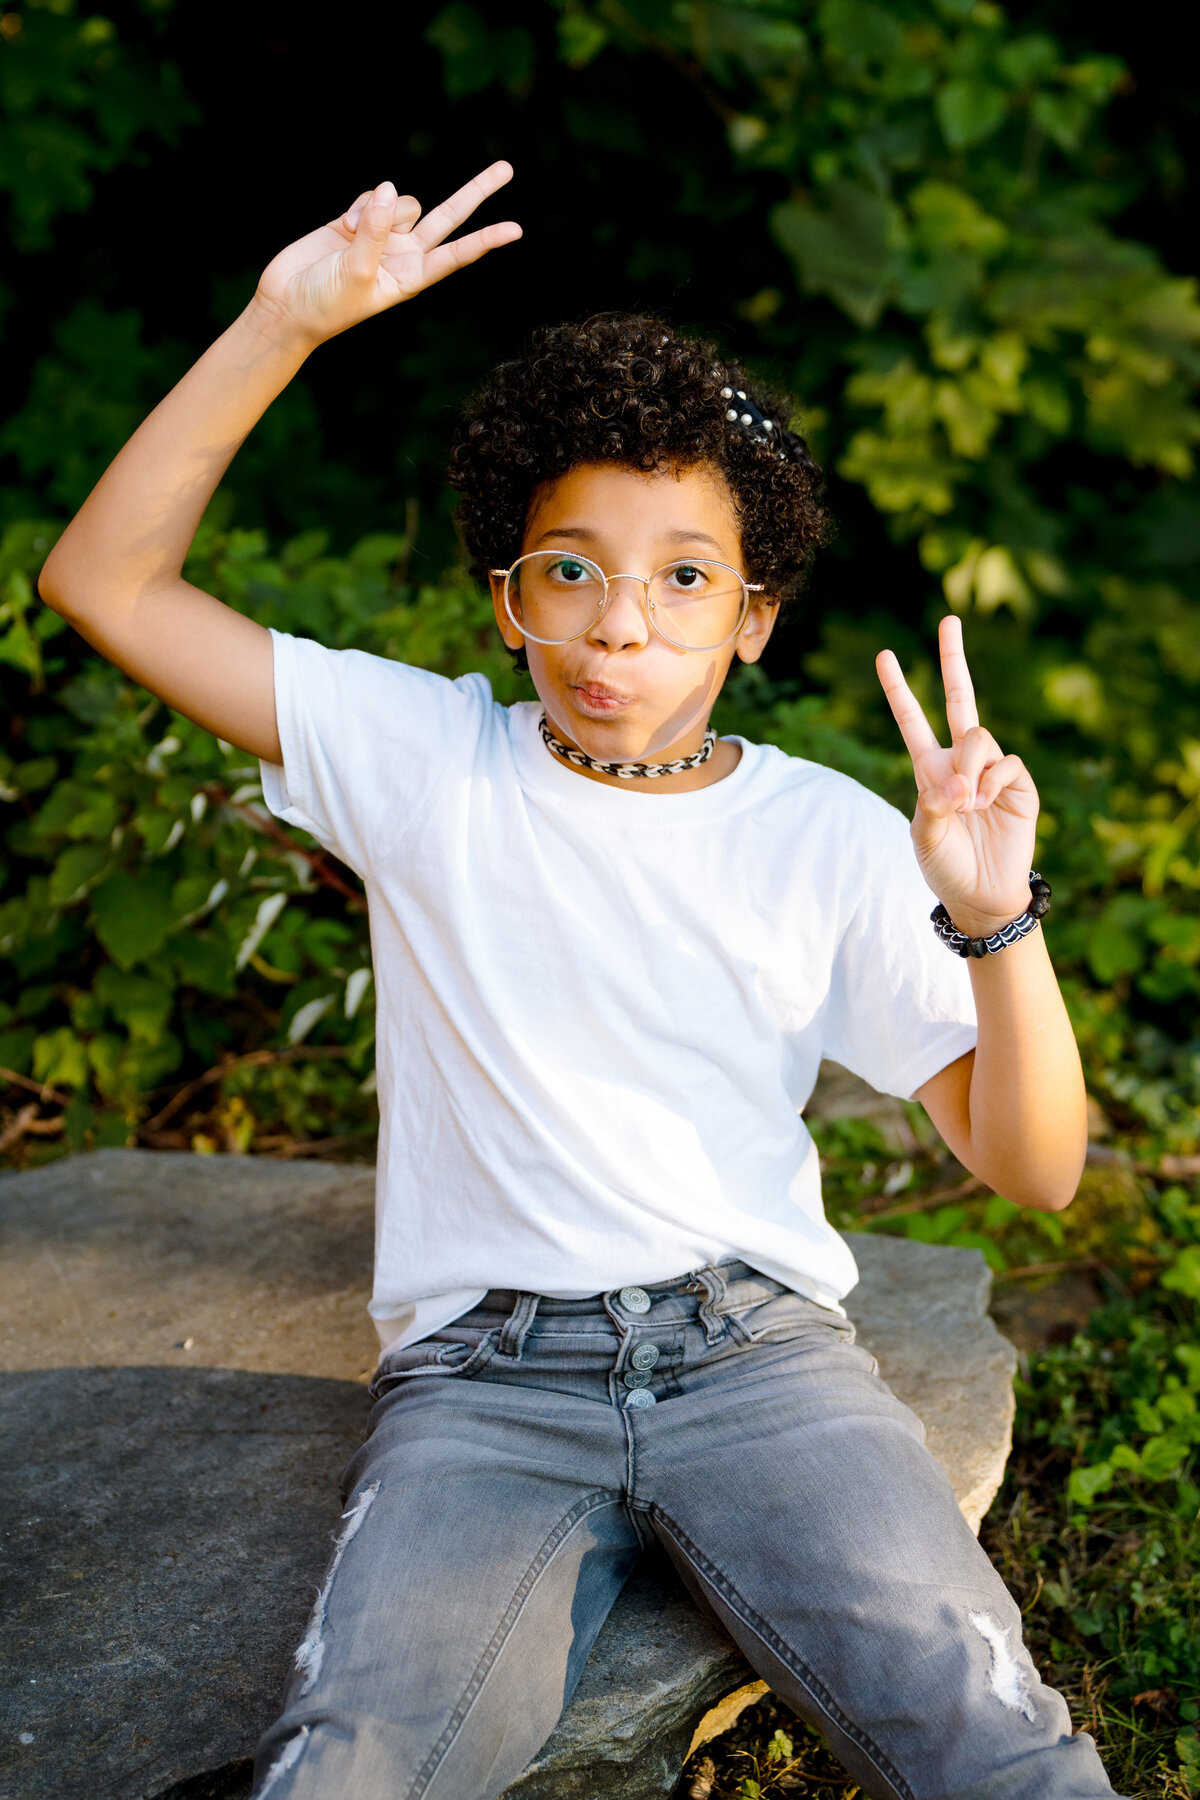 A young child making a funny face and holding up peace signs while sitting on a rock.